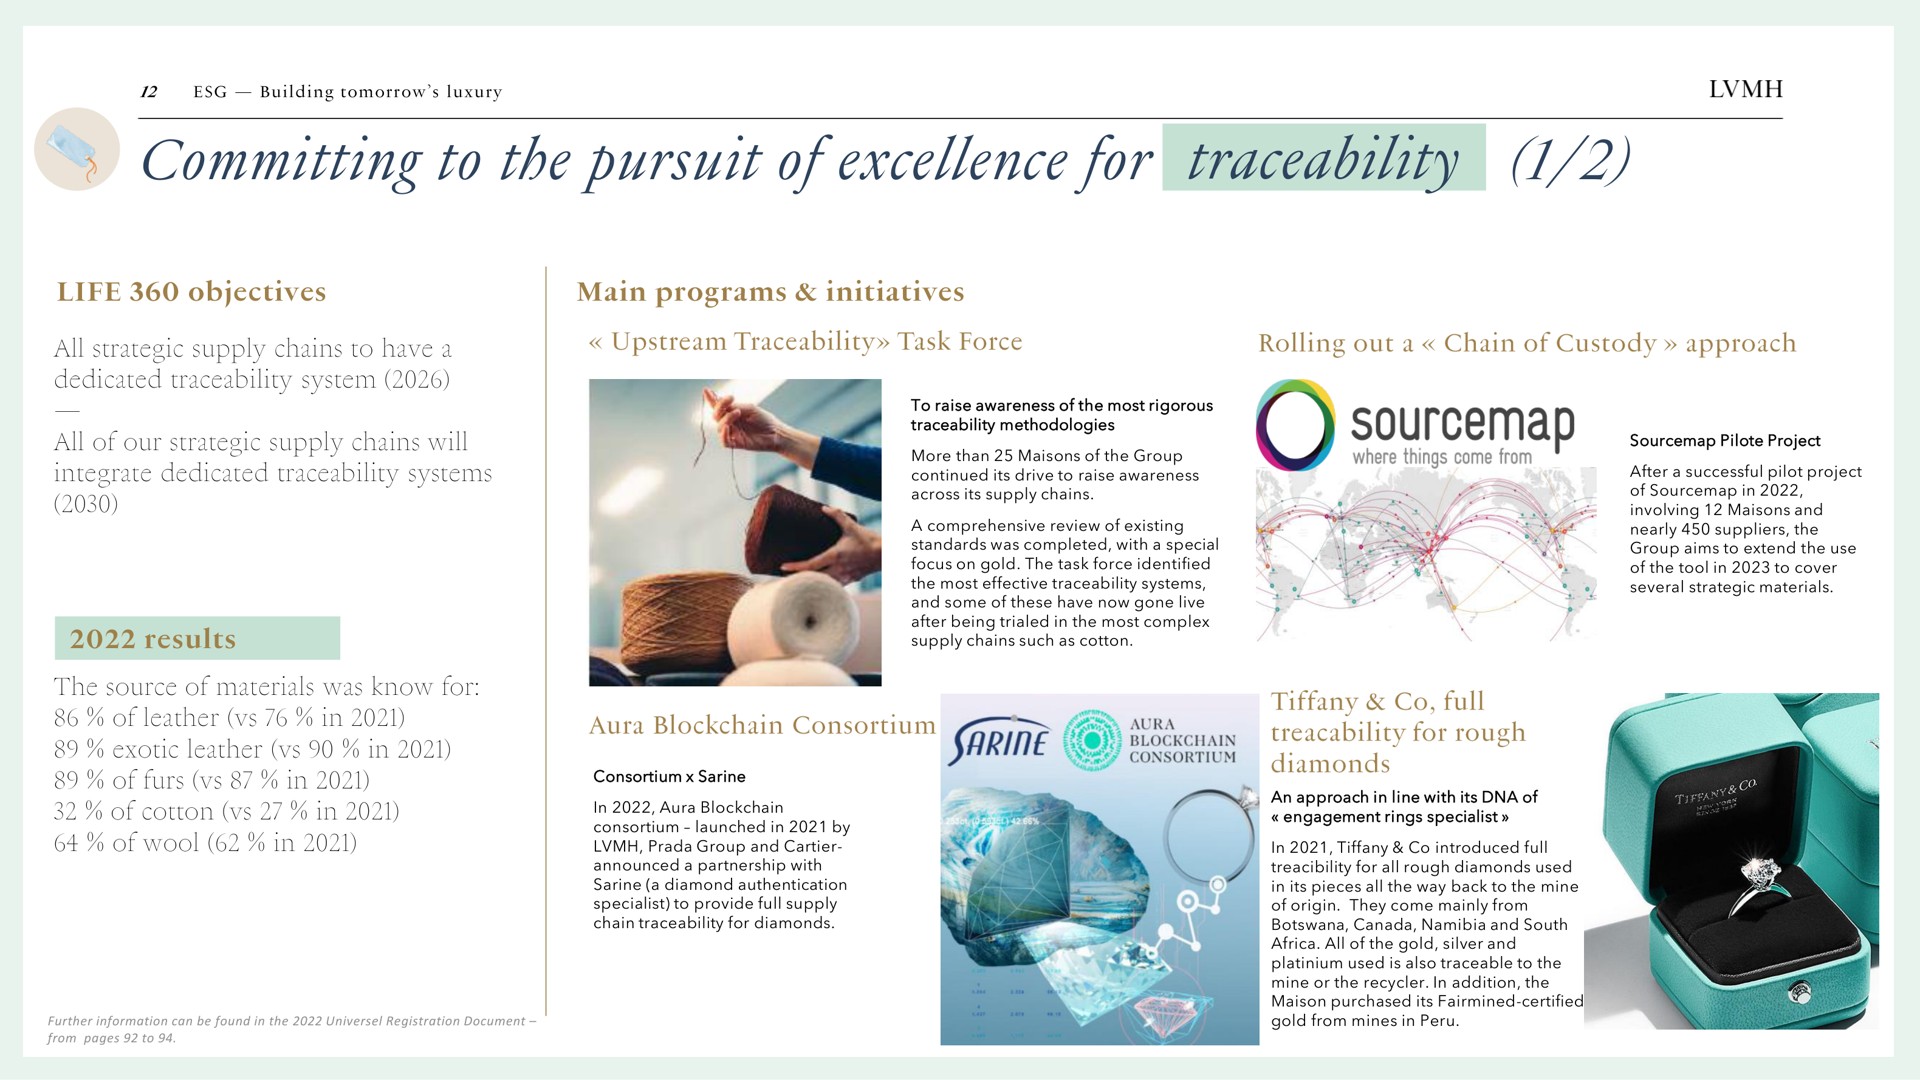 committing to the pursuit of excellence for traceability | LVMH